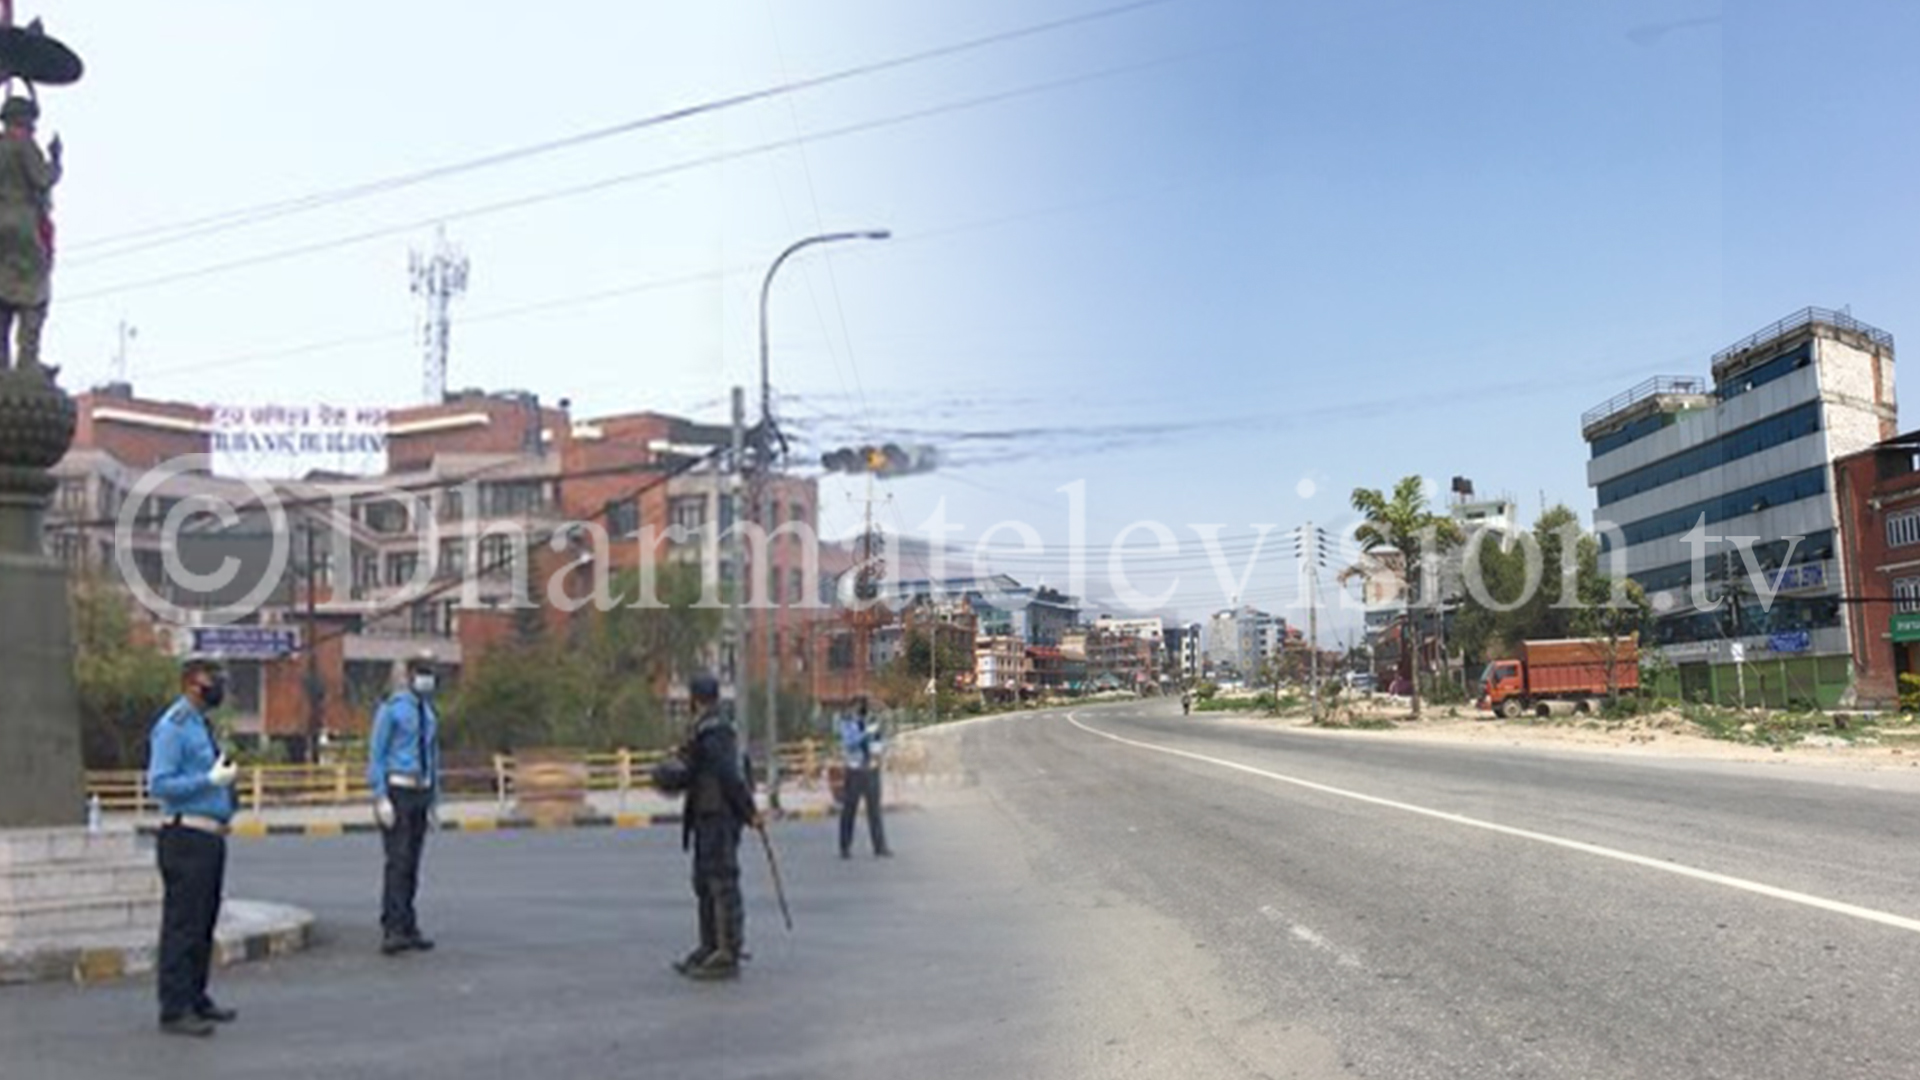 Preparations to ease ban in the Kathmandu Valley, suggestions to mobilize army at checkpoints